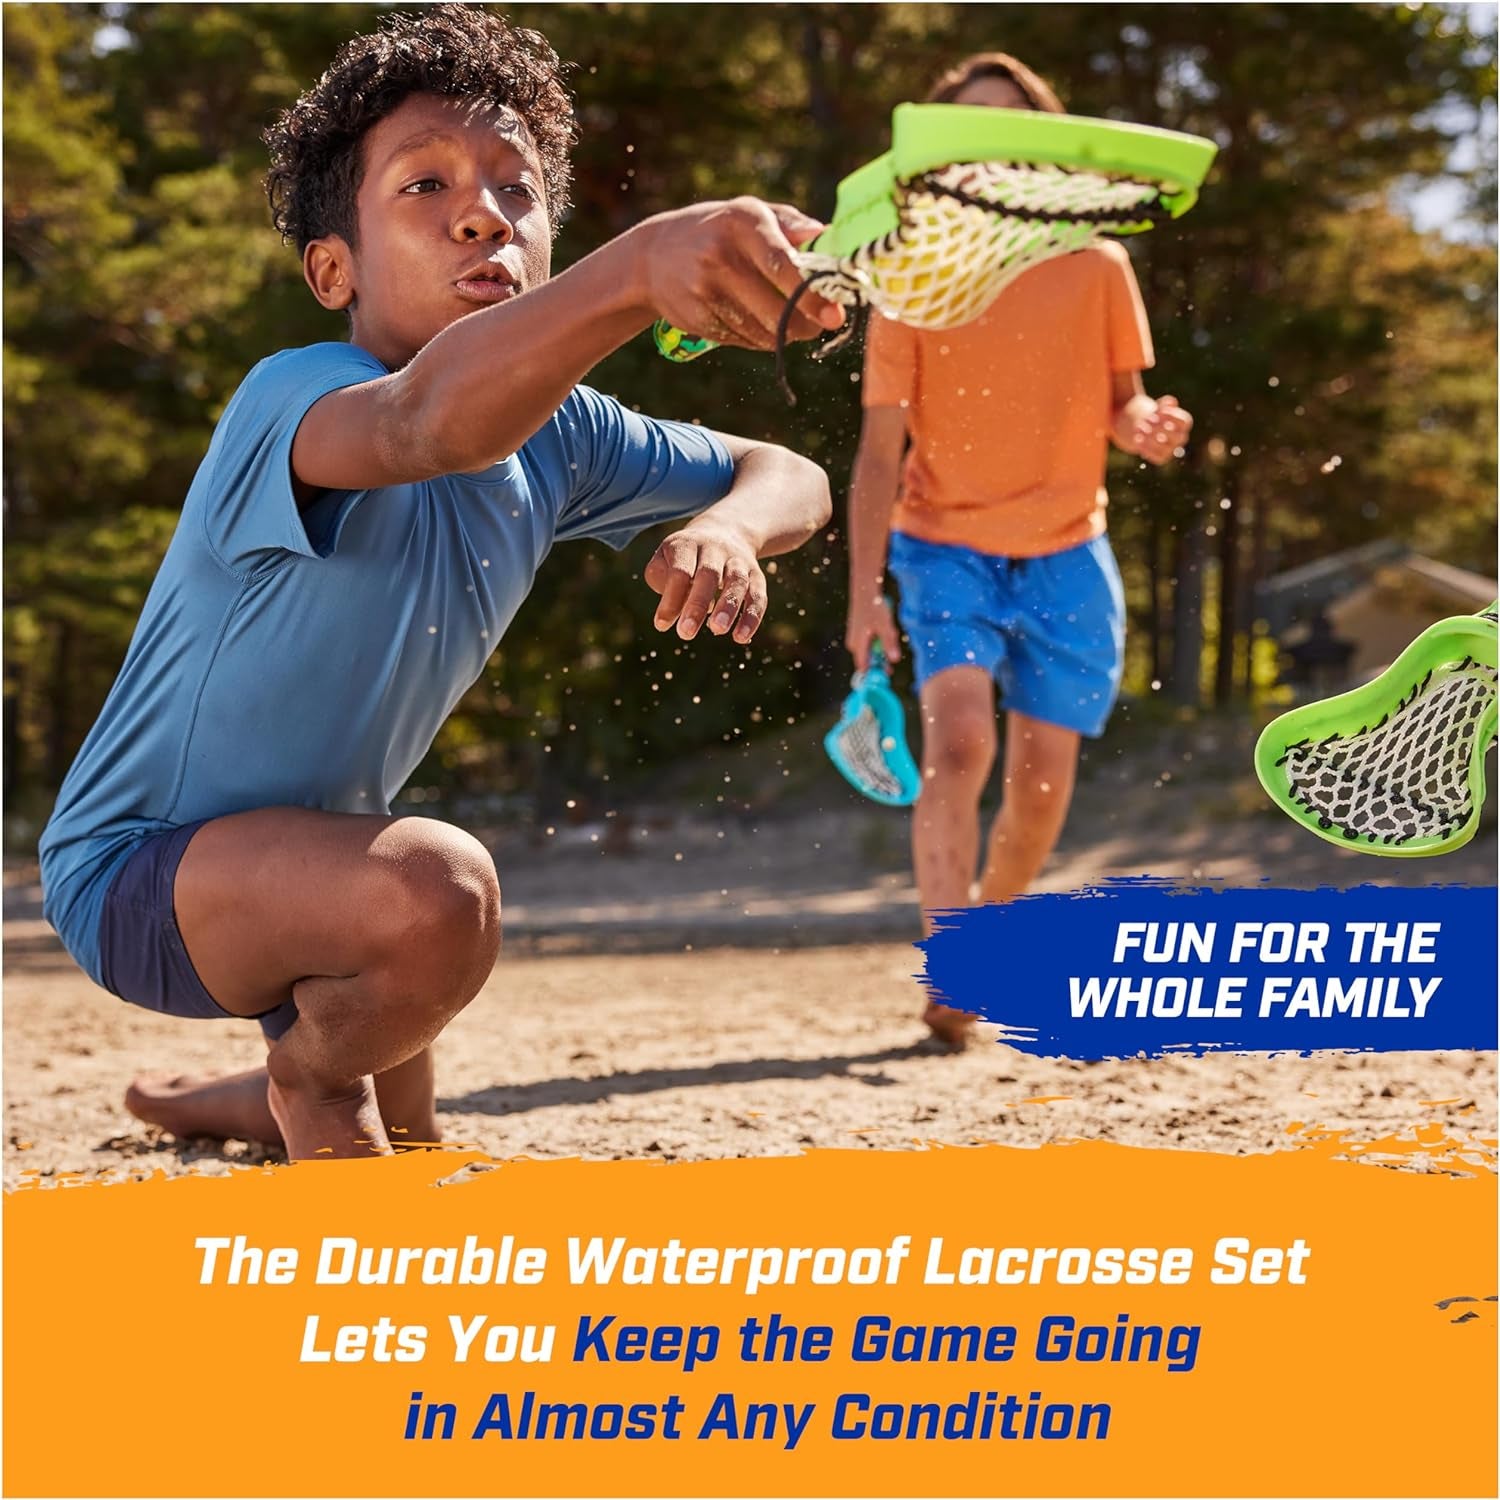 Hydro Lacrosse, Blue, Outdoor Games for Adults & Kids